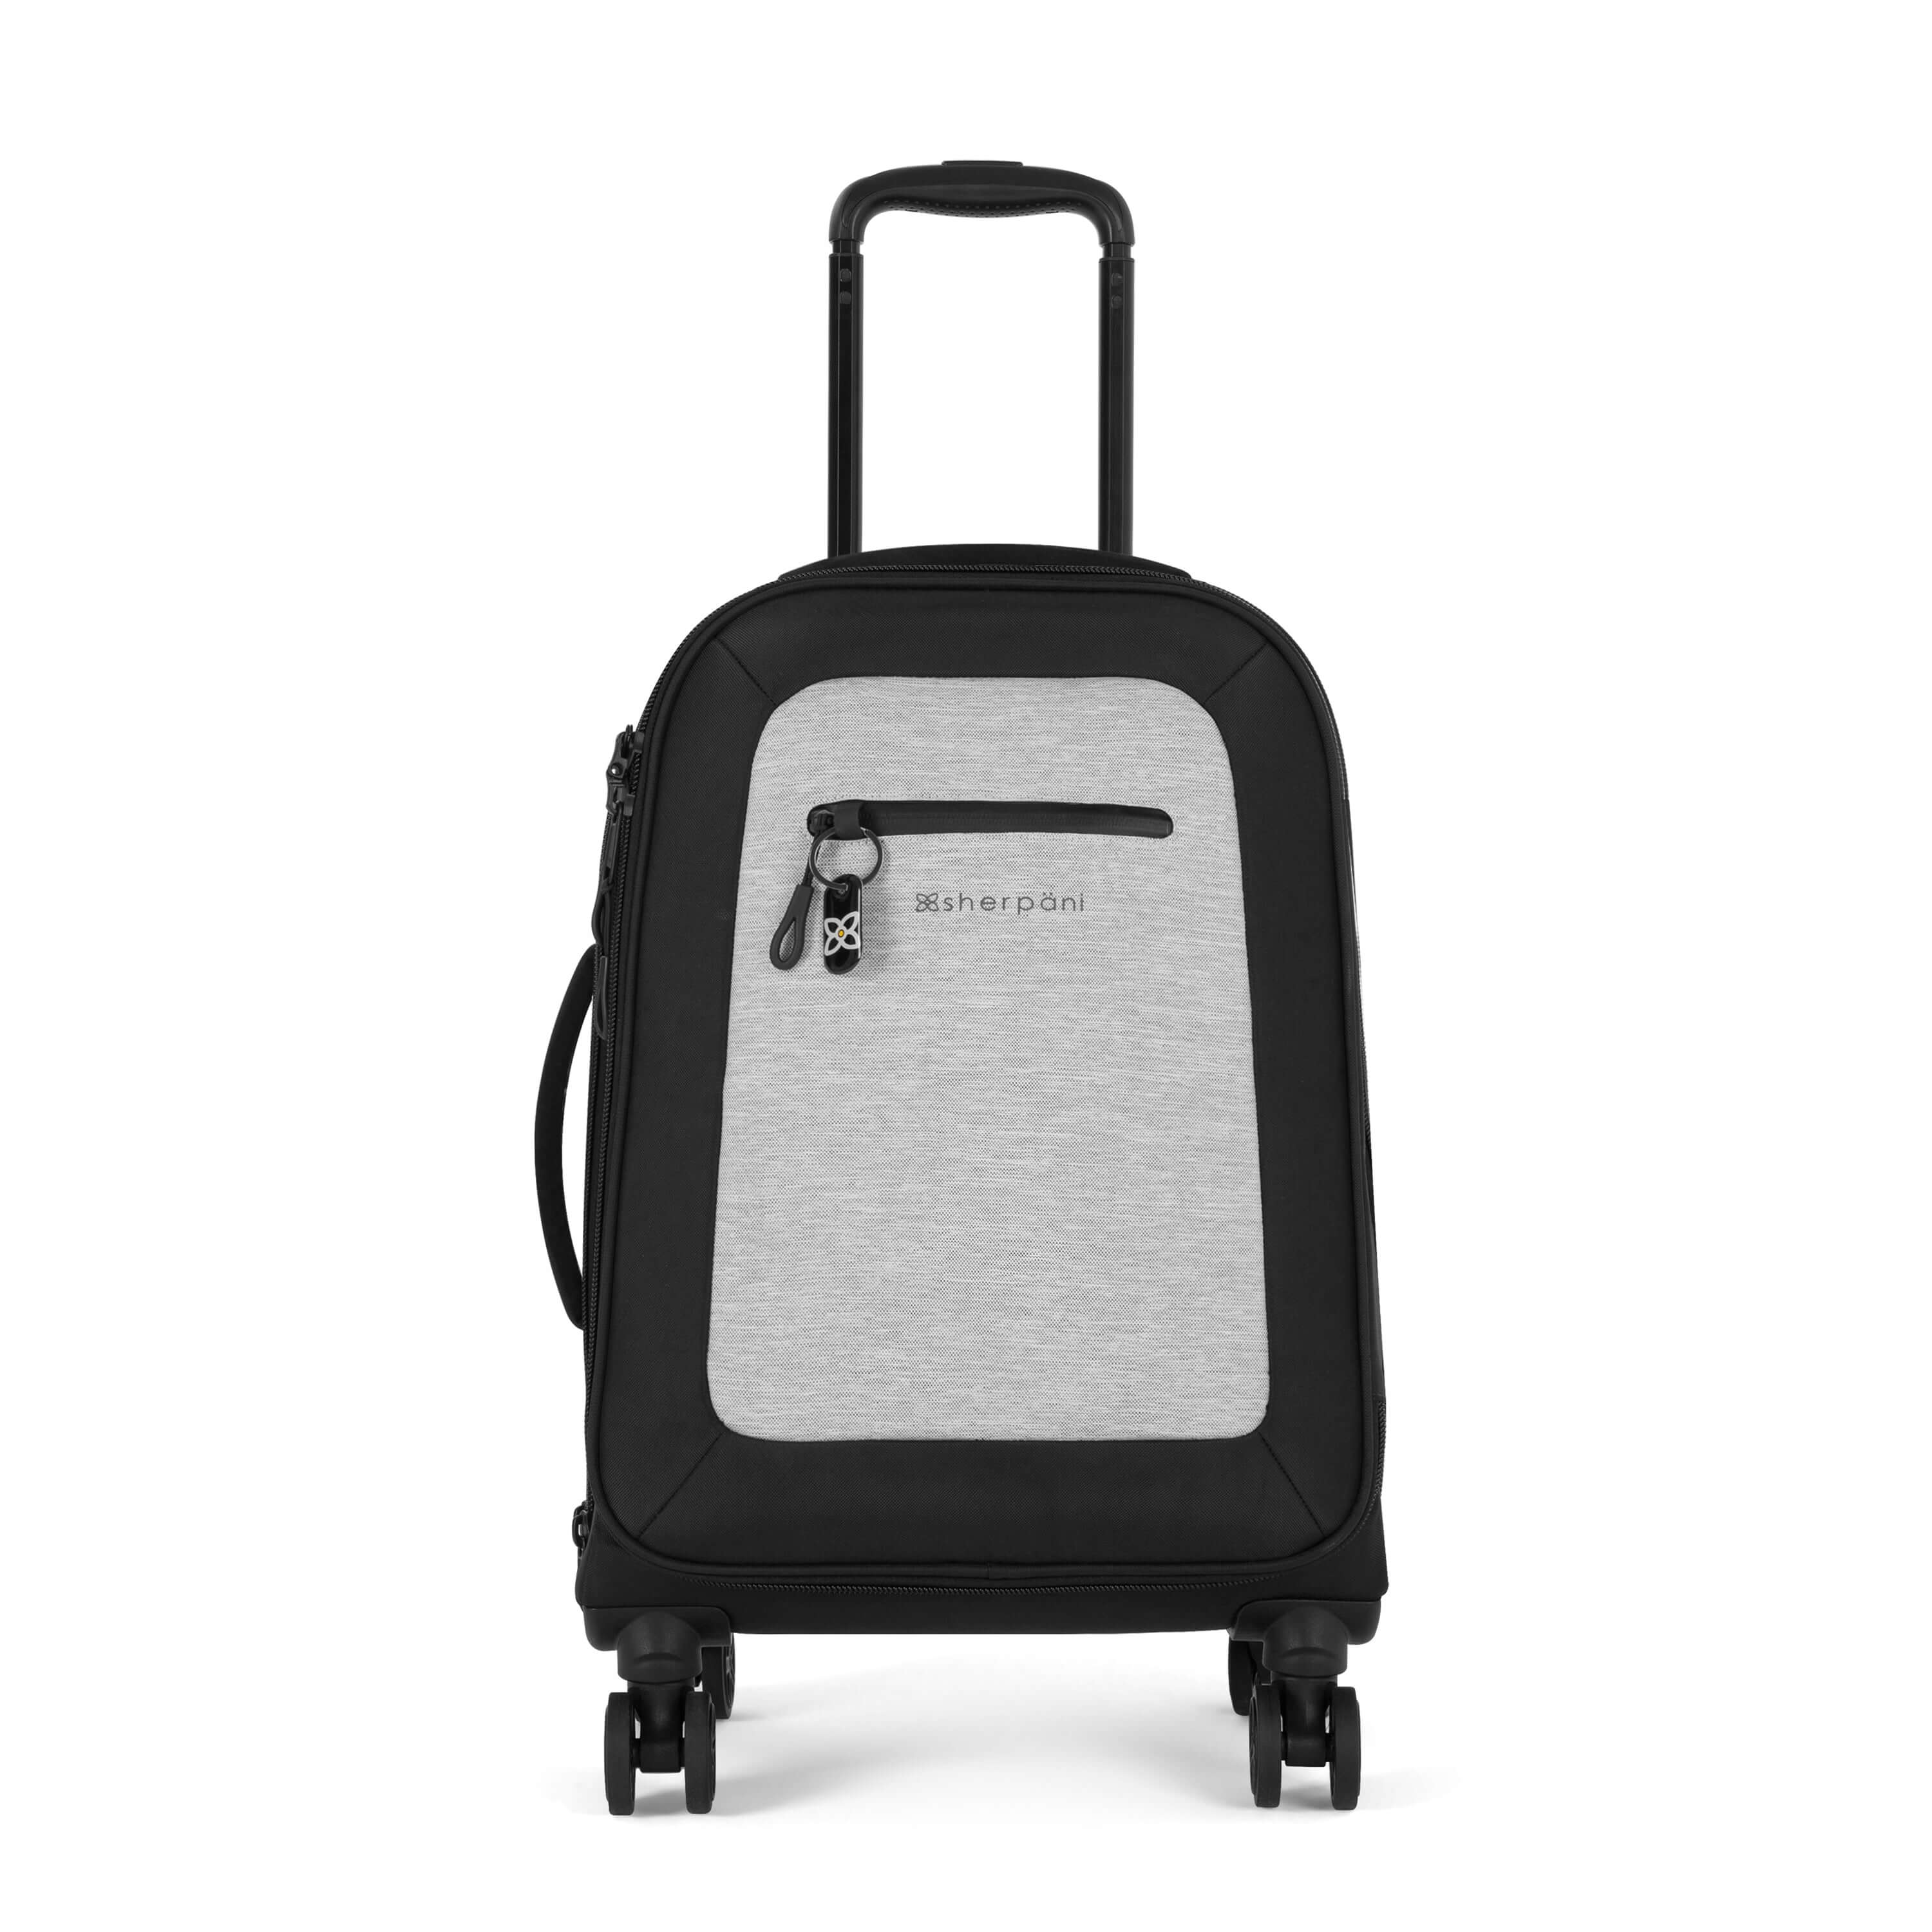 Flat front view of Sherpani's Anti-Theft luggage the Latitude in Sterling. The suitcase has a soft shell exterior made from recycled plastic bottles and features vegan leather accents in black. There is a main zipper compartment, an expansion zipper and an external pocket on the front with a locking zipper and a ReturnMe tag. On the top of the suitcase sits a retractable luggage handle. On the side sits an easy-access handle. At the bottom are four 360-degree spinner wheels for rolling. 